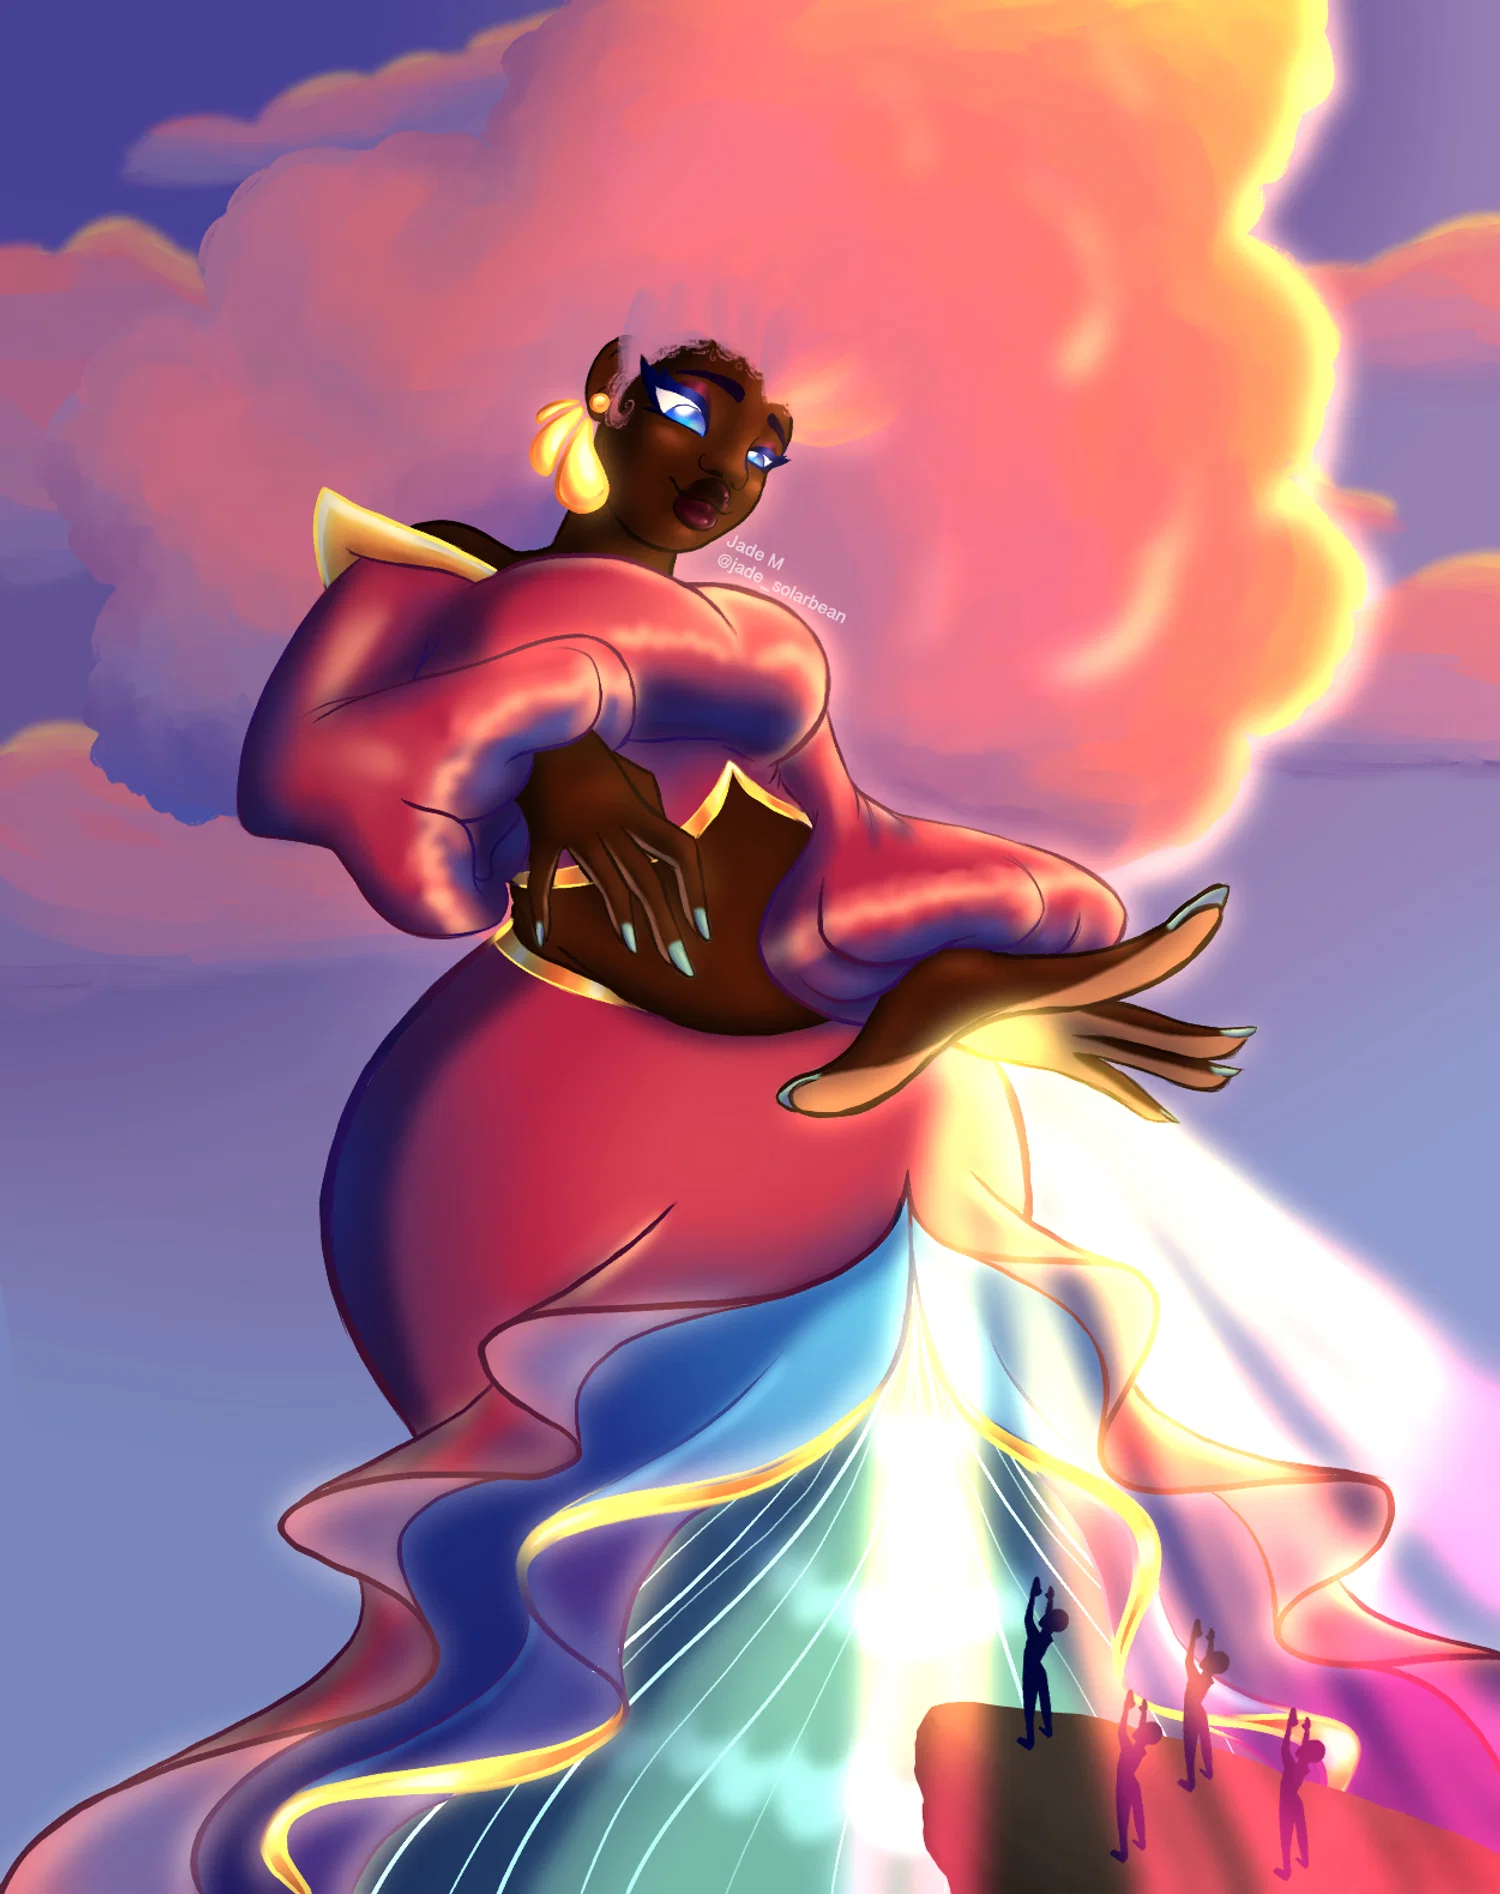 A giant woman with sunset cloud hair shines beams of light on humans.